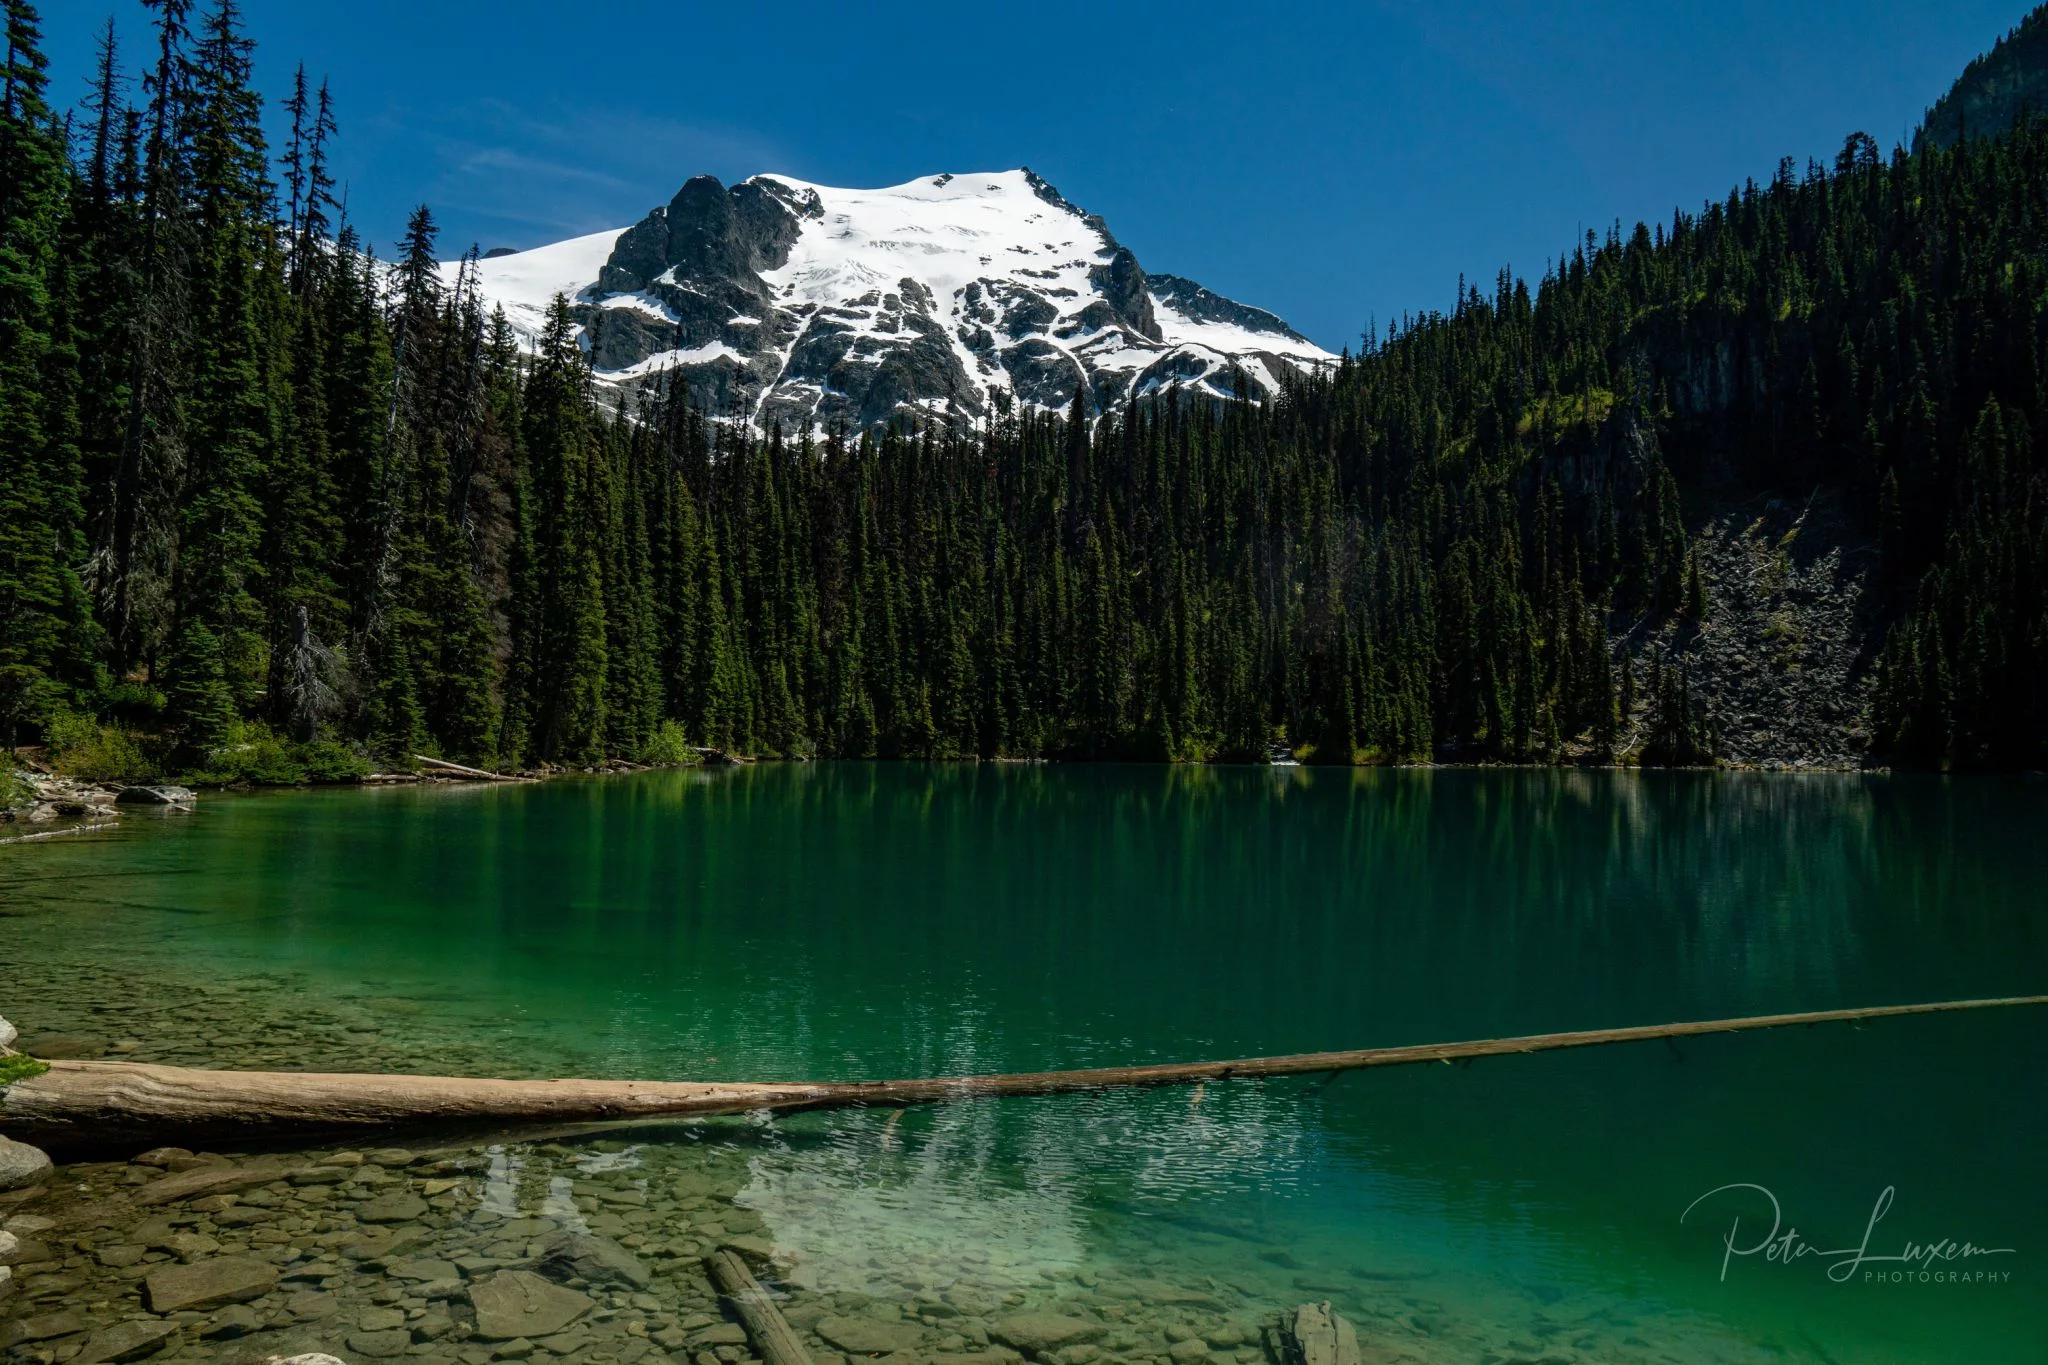 Middle Joffre lakes, Canada